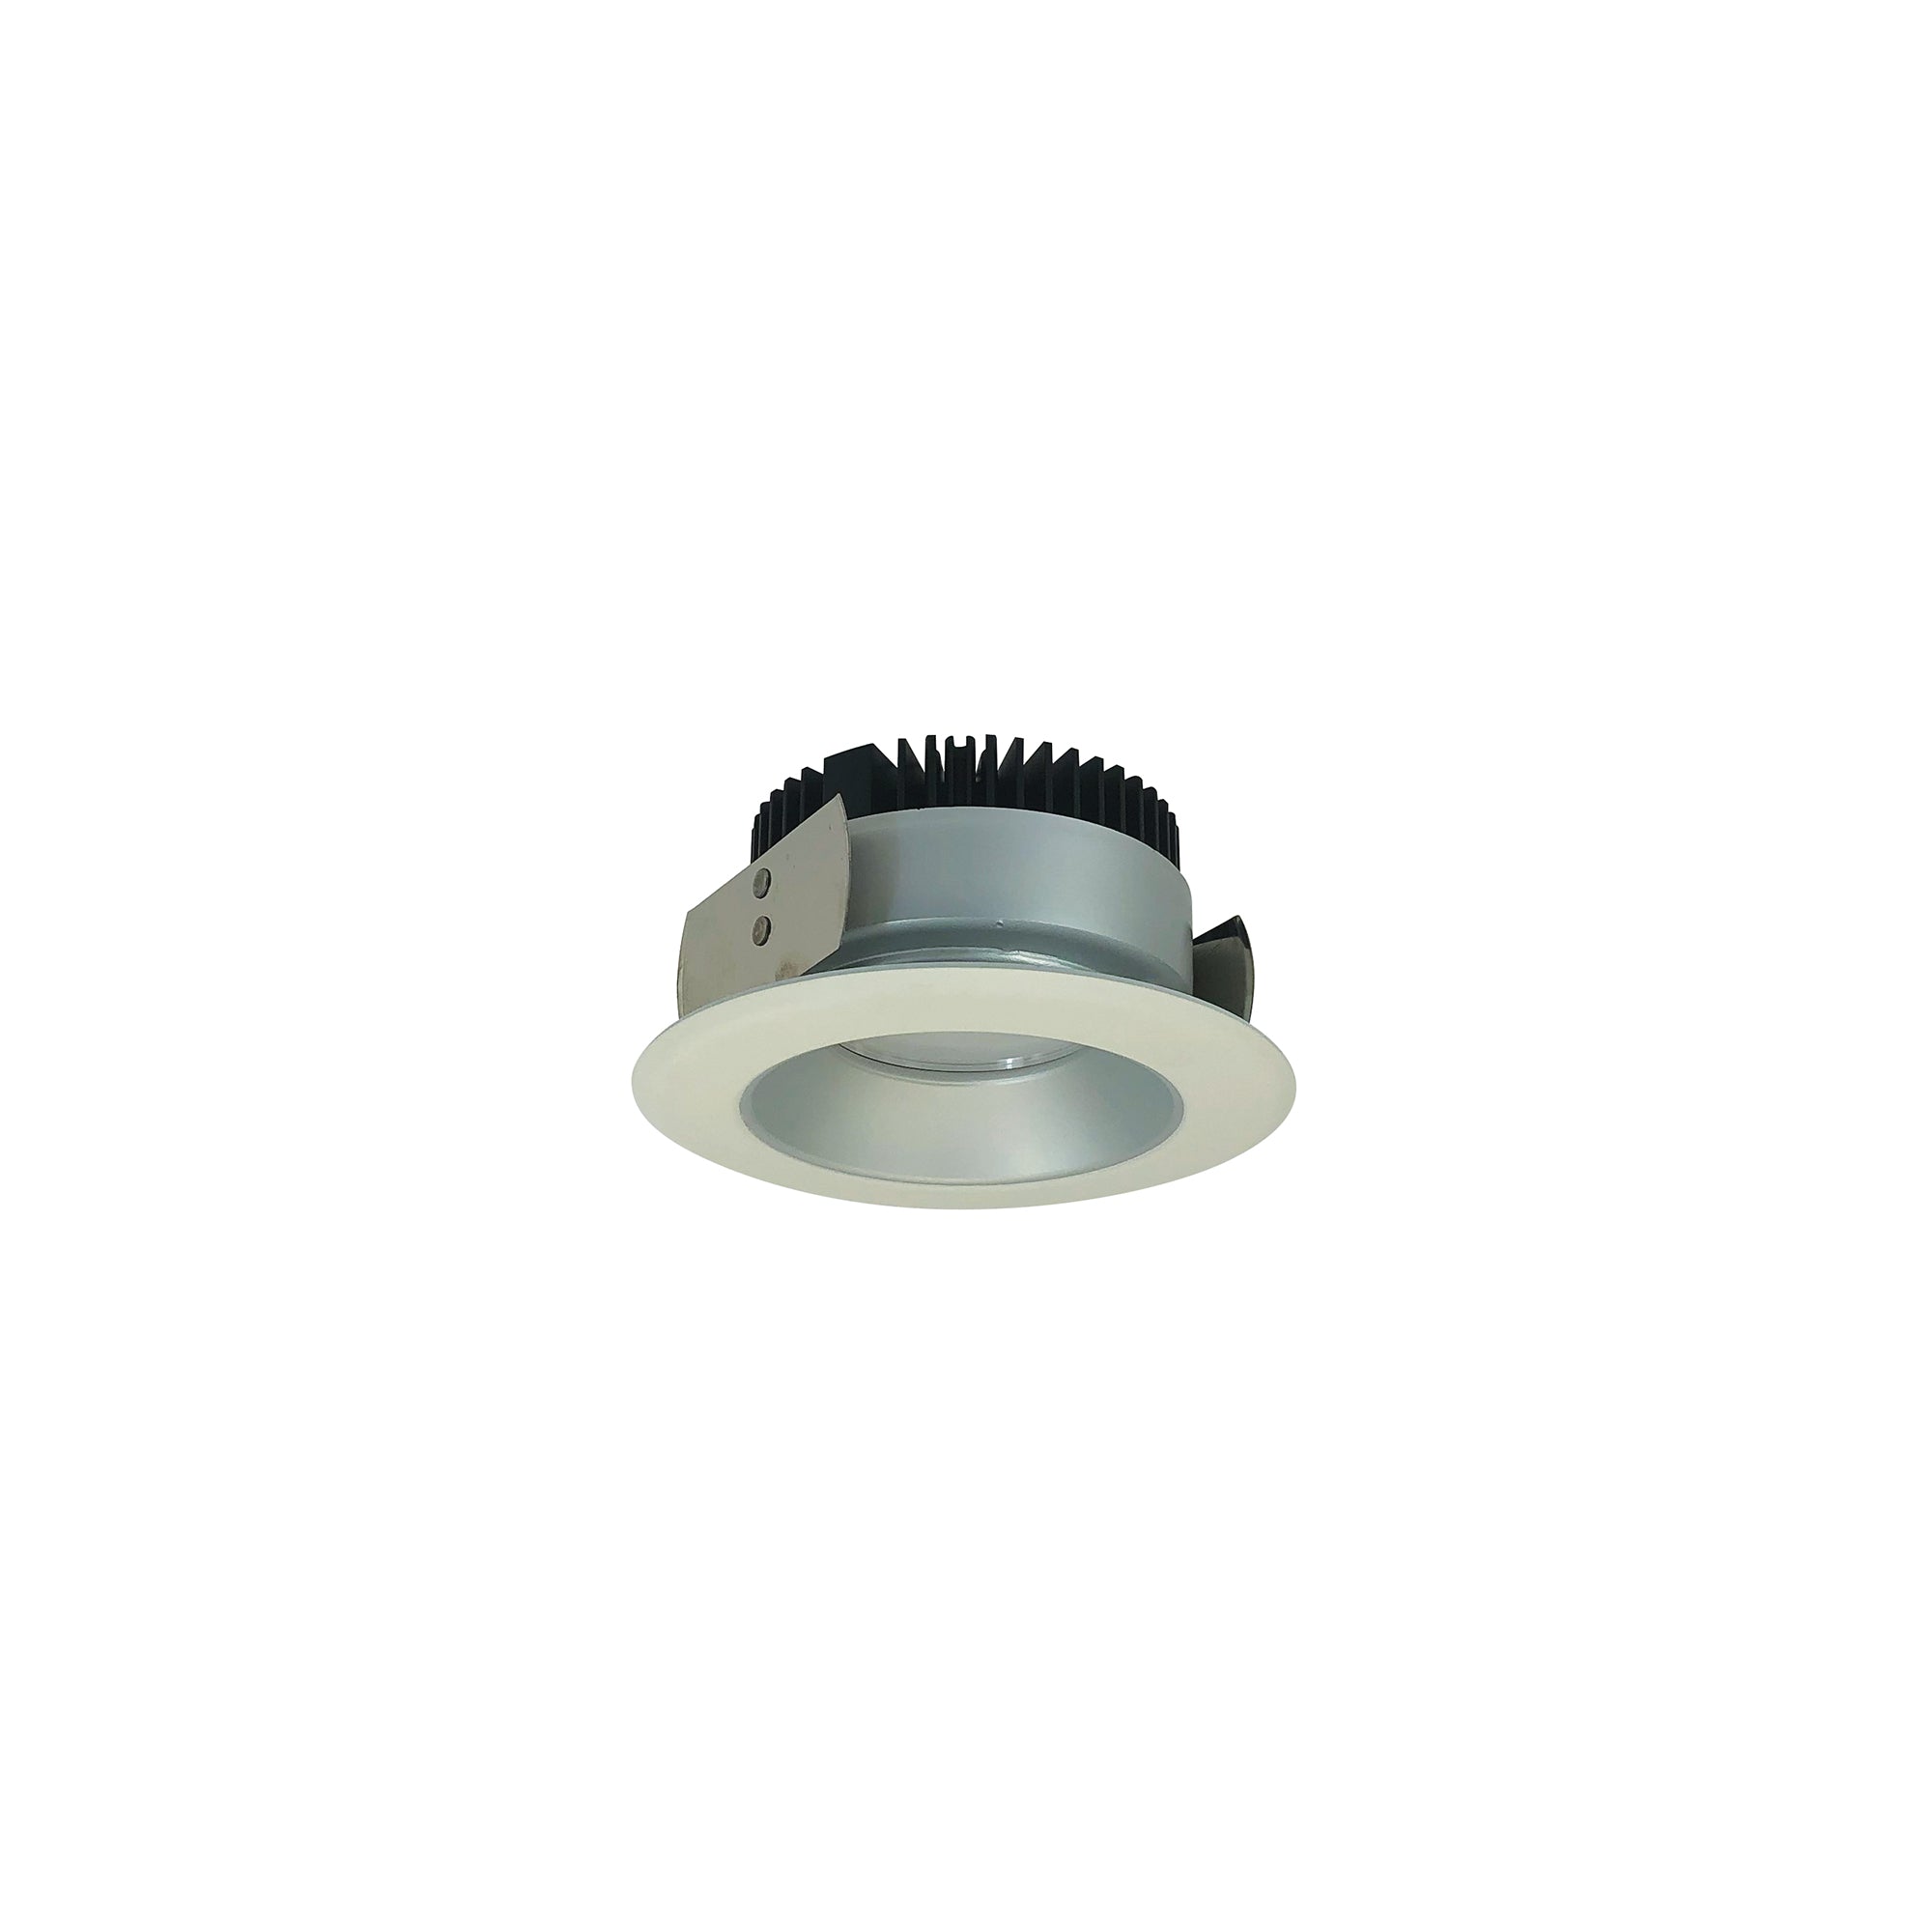 Nora Lighting NRM2-411L0930SHZW - Recessed - 4 Inch Marquise II Round Reflector, 900lm, 3000K, Spot, Haze/White